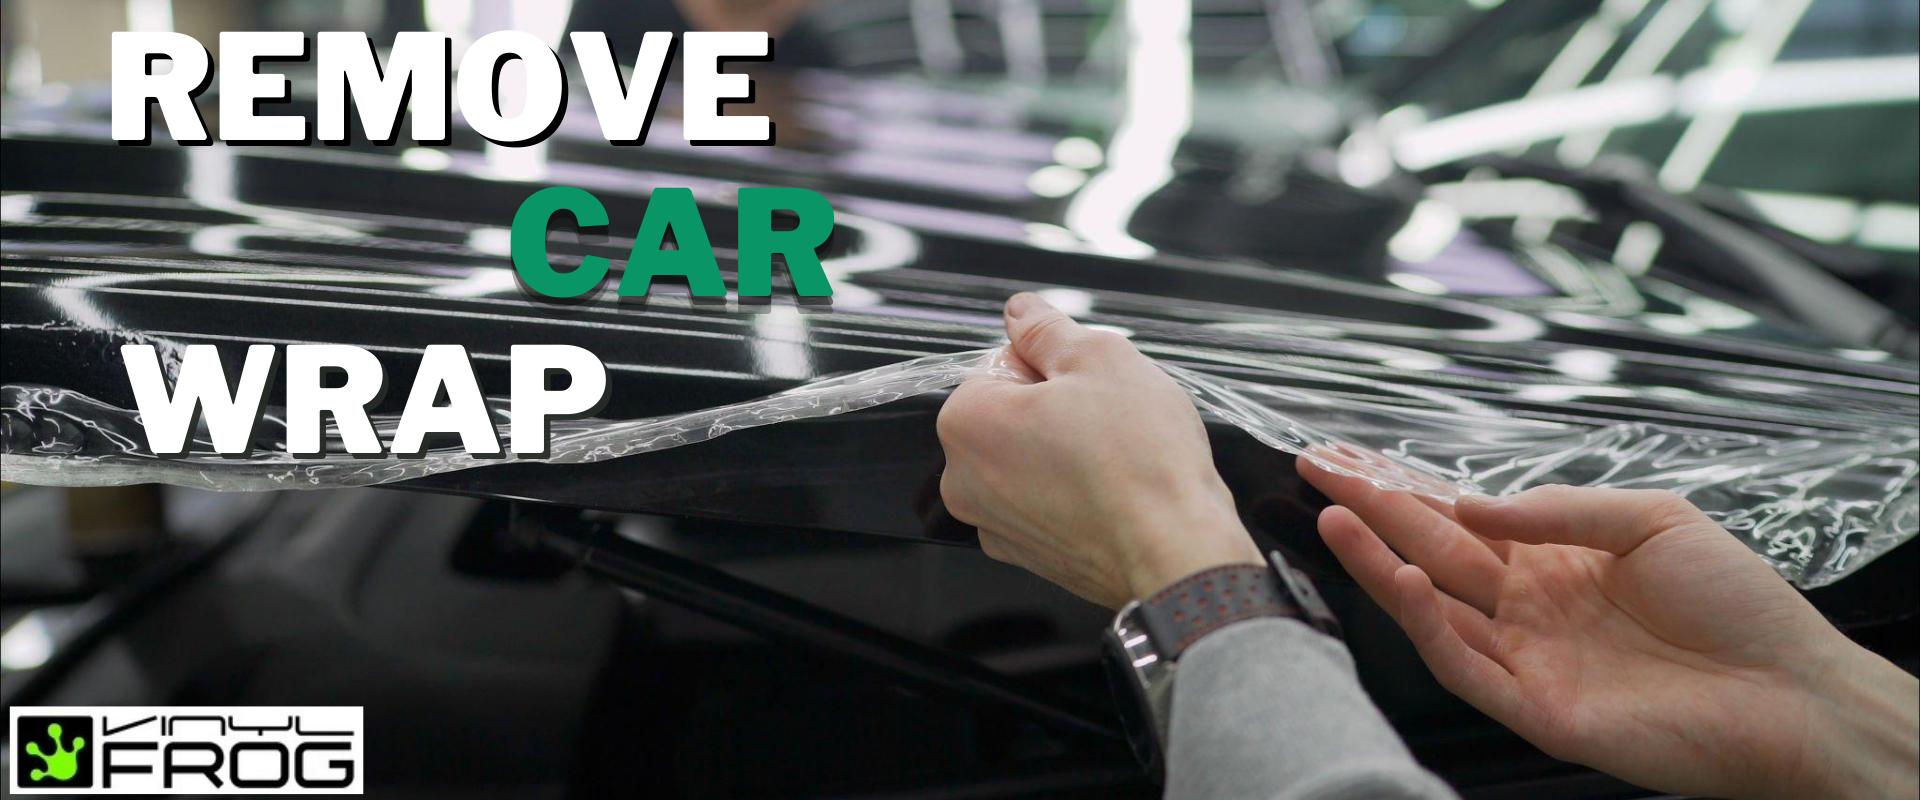 HOW TO REMOVE CAR WRAP